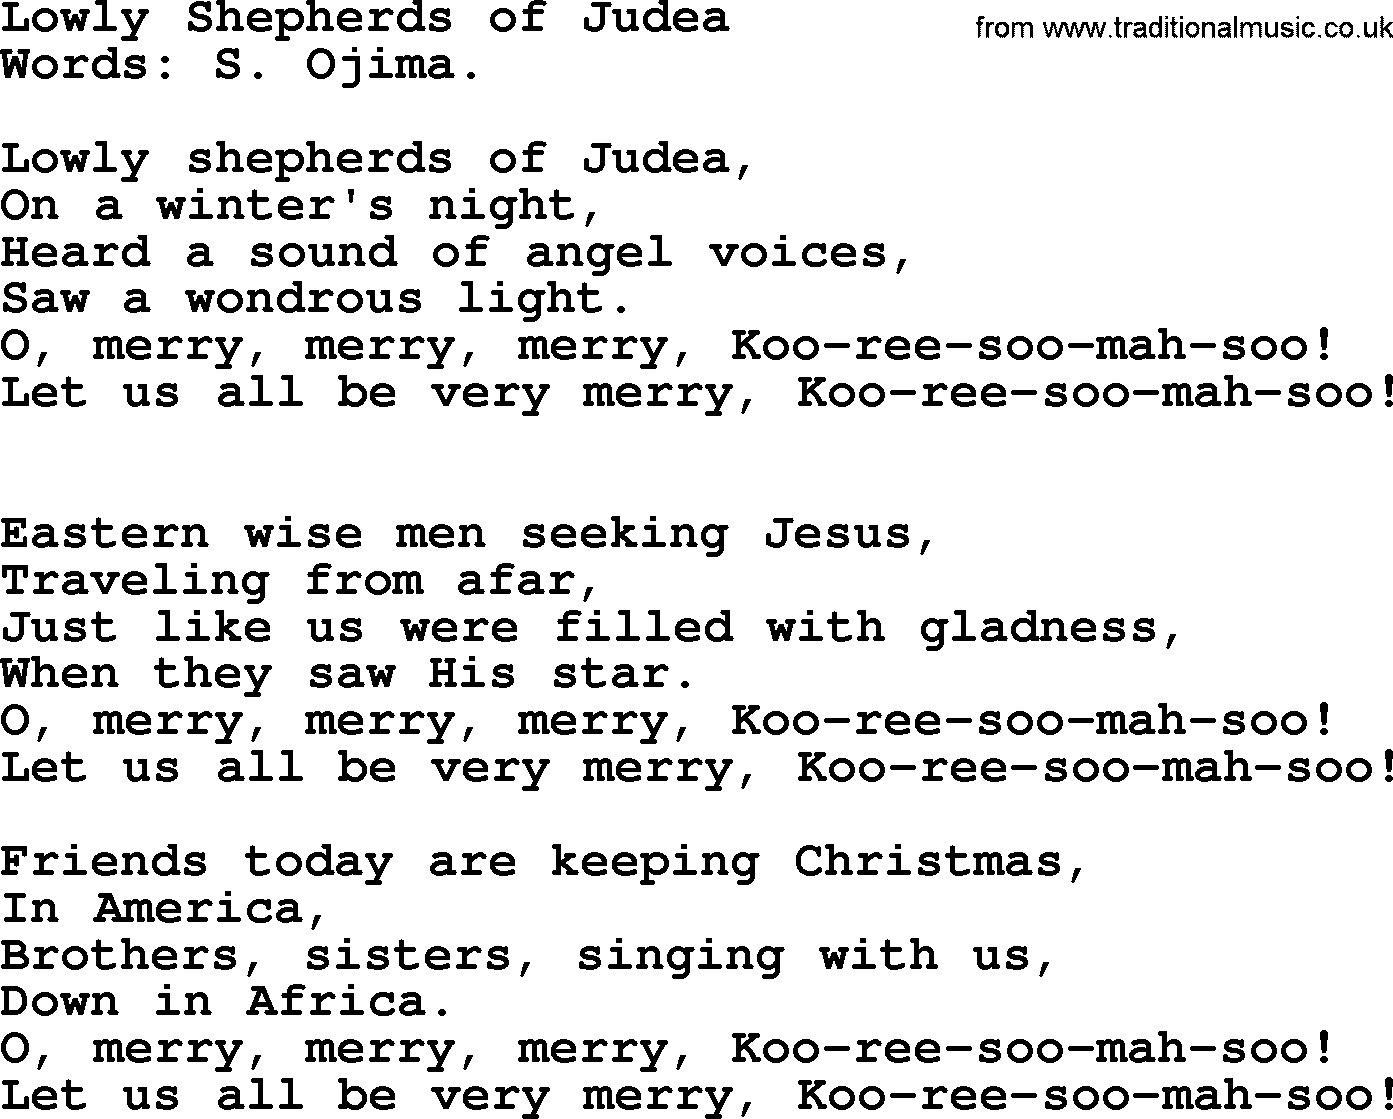 280 Christmas Hymns and songs with PowerPoints and PDF, title: Lowly Shepherds Of Judea, lyrics, PPT and PDF